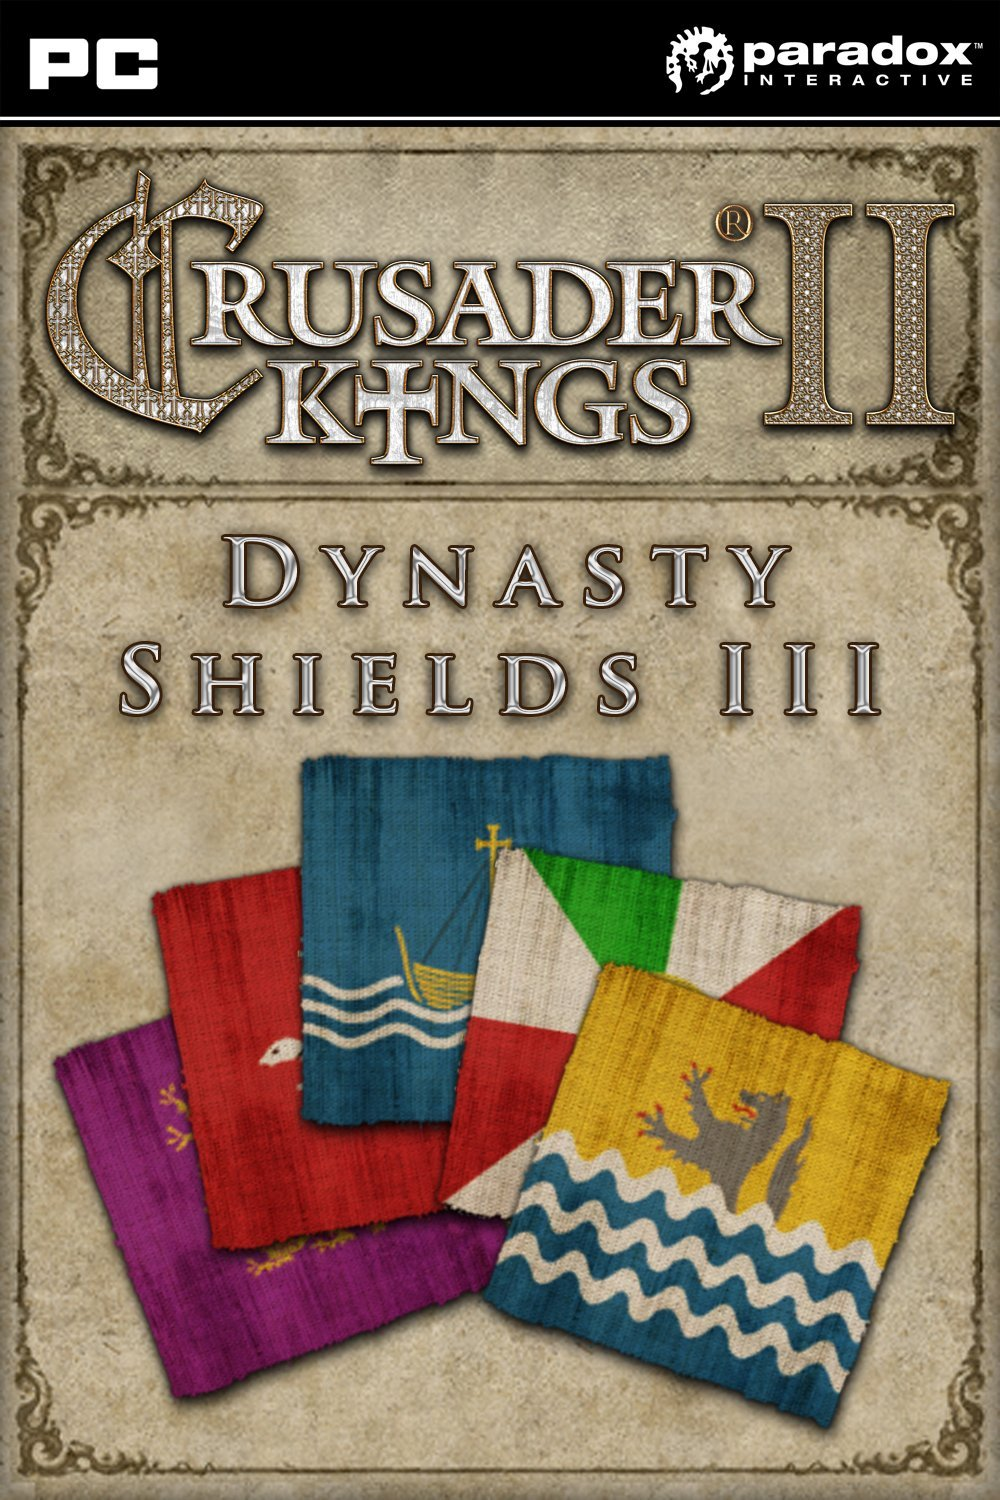 ck2 edit dynasty name without changing coat of arms